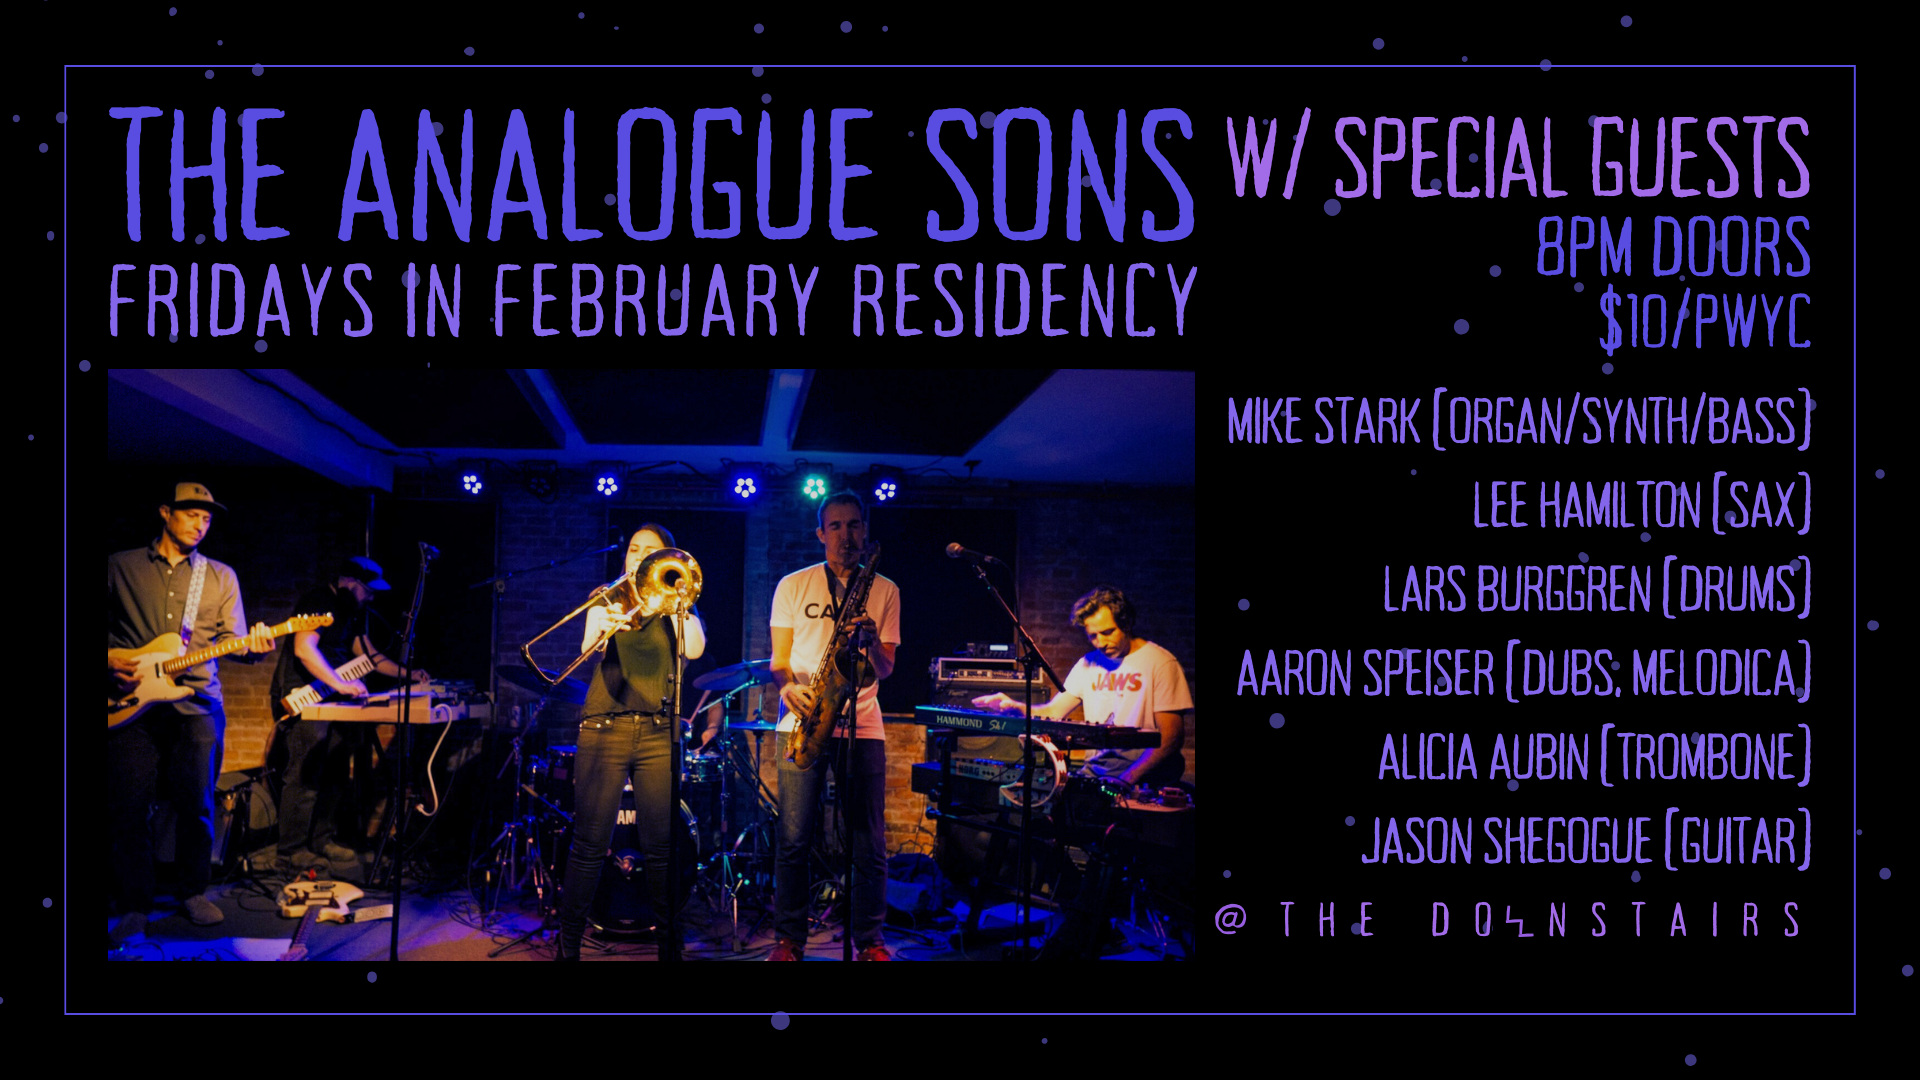 The Analogue Sons w/ Special Guests - Fridays in February Residency